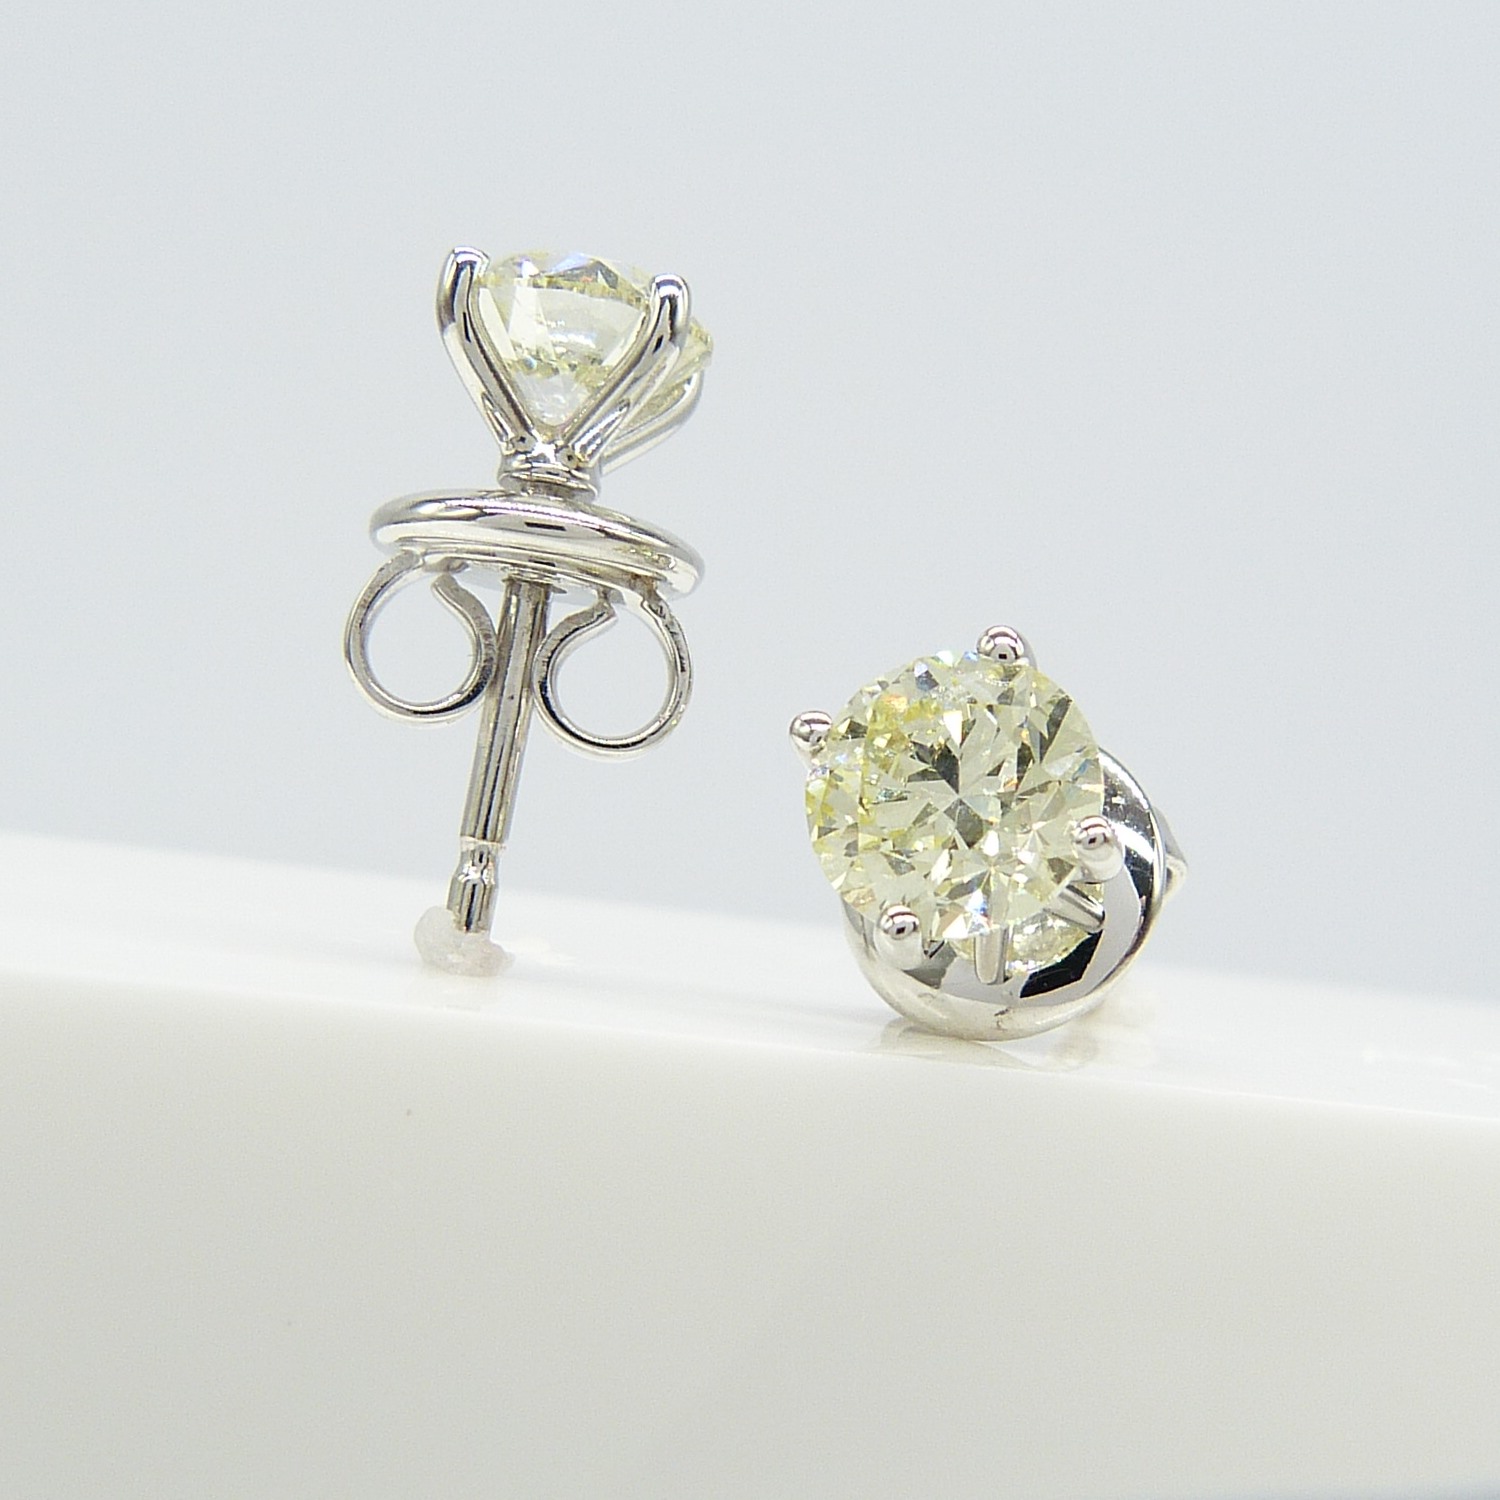 1.32 Carat Diamond Stud Earrings In 18ct White Gold, Certificated and Boxed - Image 7 of 8